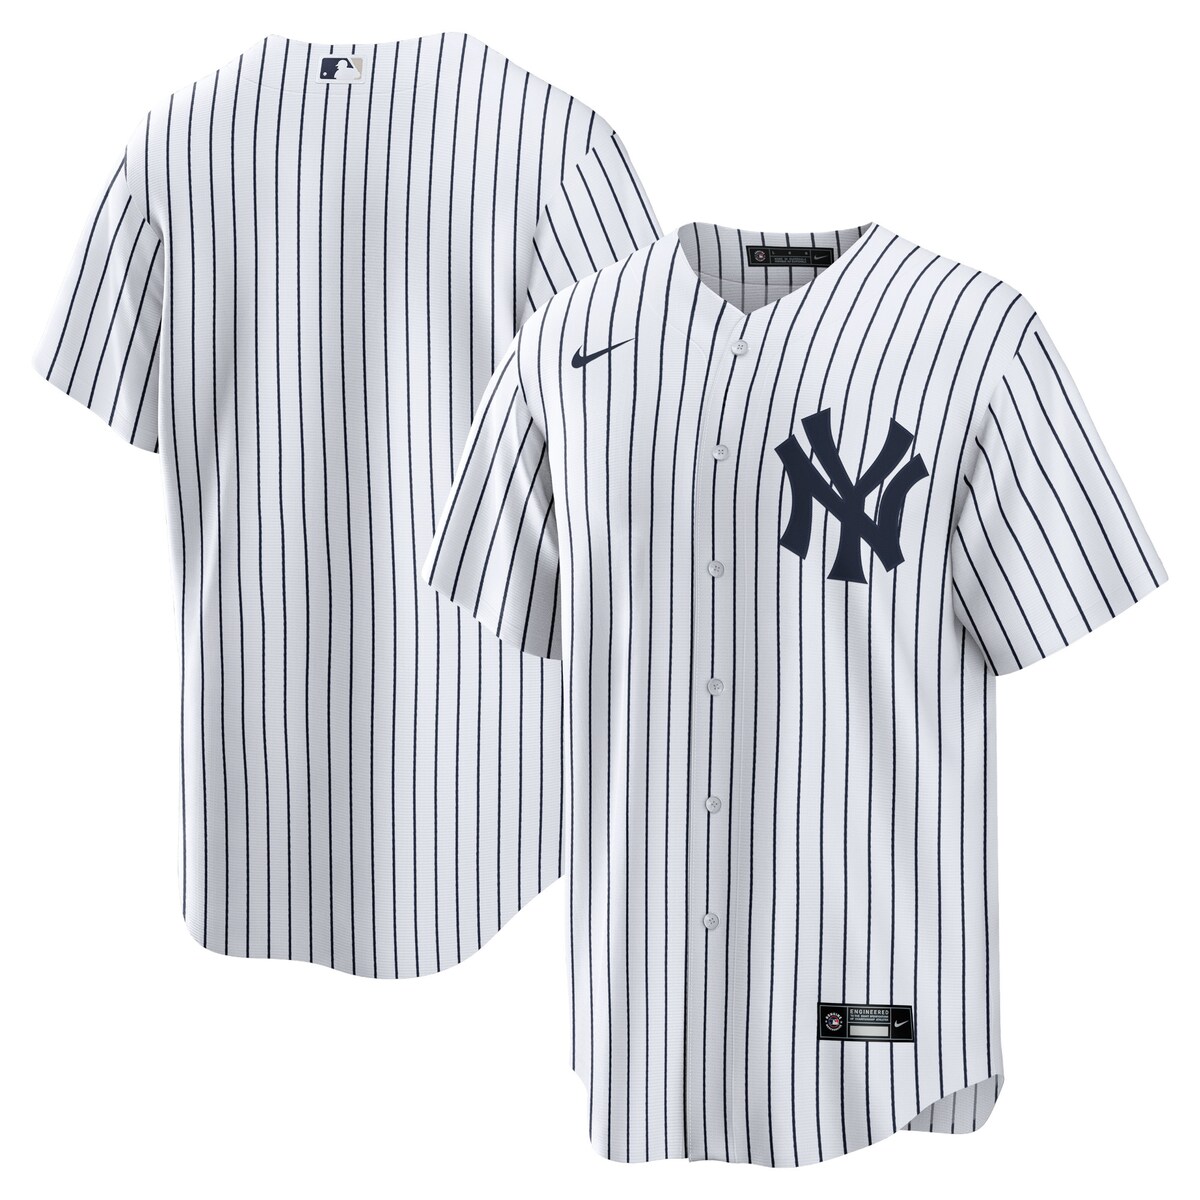 Whether you're watching from the couch or from the stands, you'll be the biggest New York Yankees fan around when you sport this Home Blank Replica Jersey! This jersey features detailed New York Yankees graphics that will showcase your team pride no matter where you rock it. The full-button front and comfortable fit will keep you cool and ready for action, making it the perfect addition to your collection of team gear.Replica JerseyMachine wash gentle or dry clean. Tumble dry low, hang dry preferred.Officially licensedHeat-sealed transfer appliqueImportedJersey Color Style: HomeMaterial: 100% PolyesterHeat-sealed jock tagBrand: NikeFull-button frontRounded hemMLB Batterman applique on center back neck